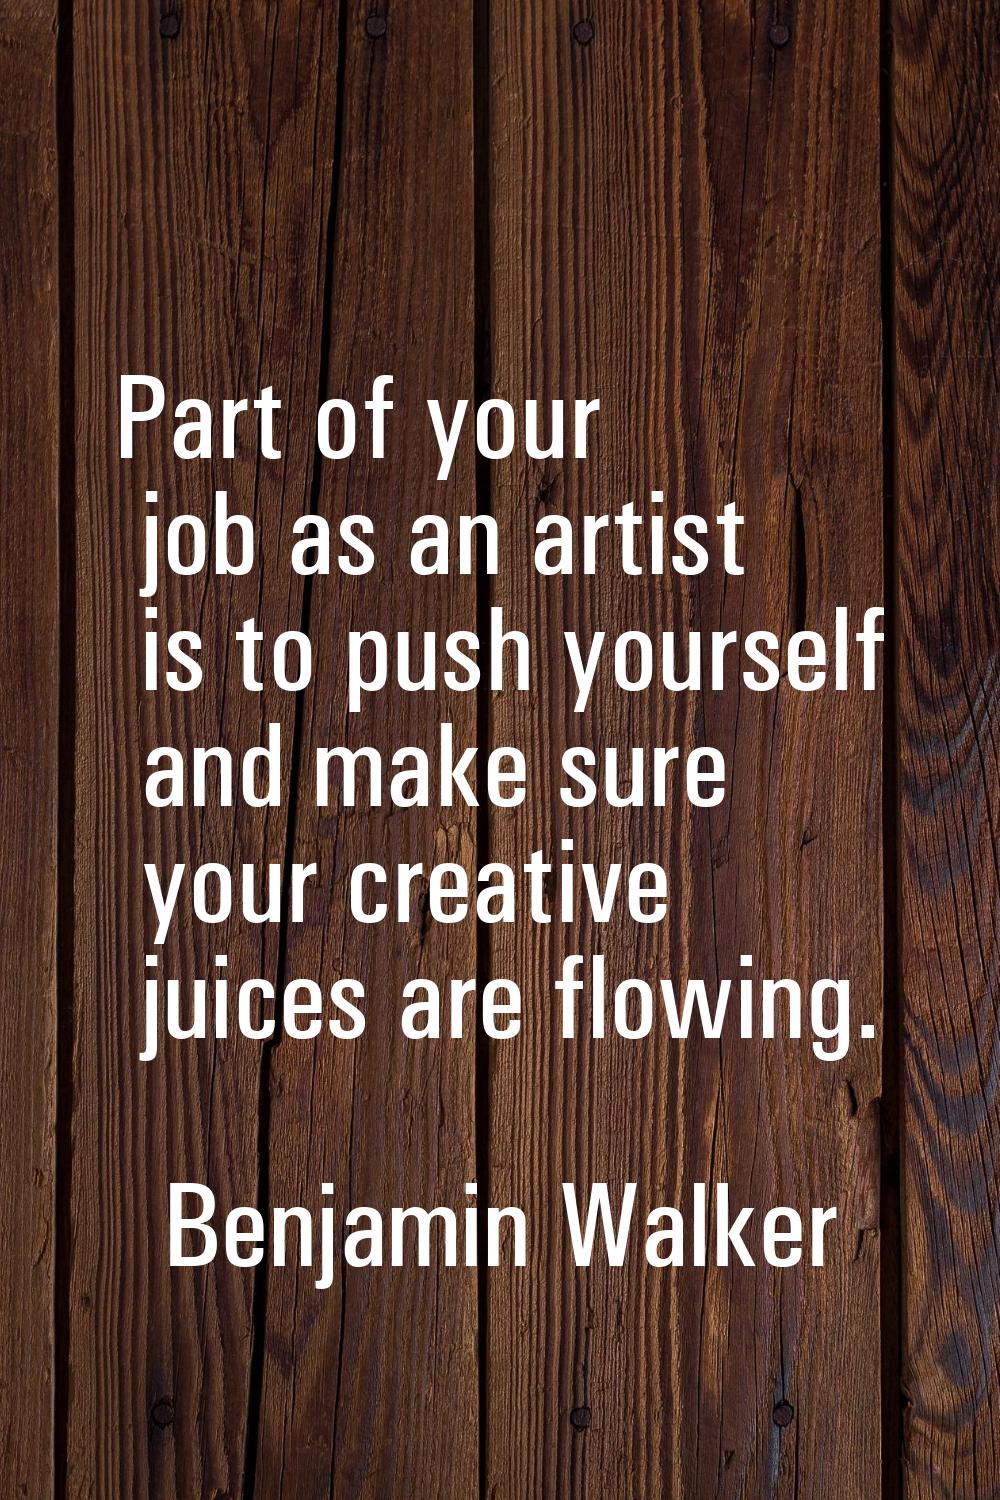 Part of your job as an artist is to push yourself and make sure your creative juices are flowing.